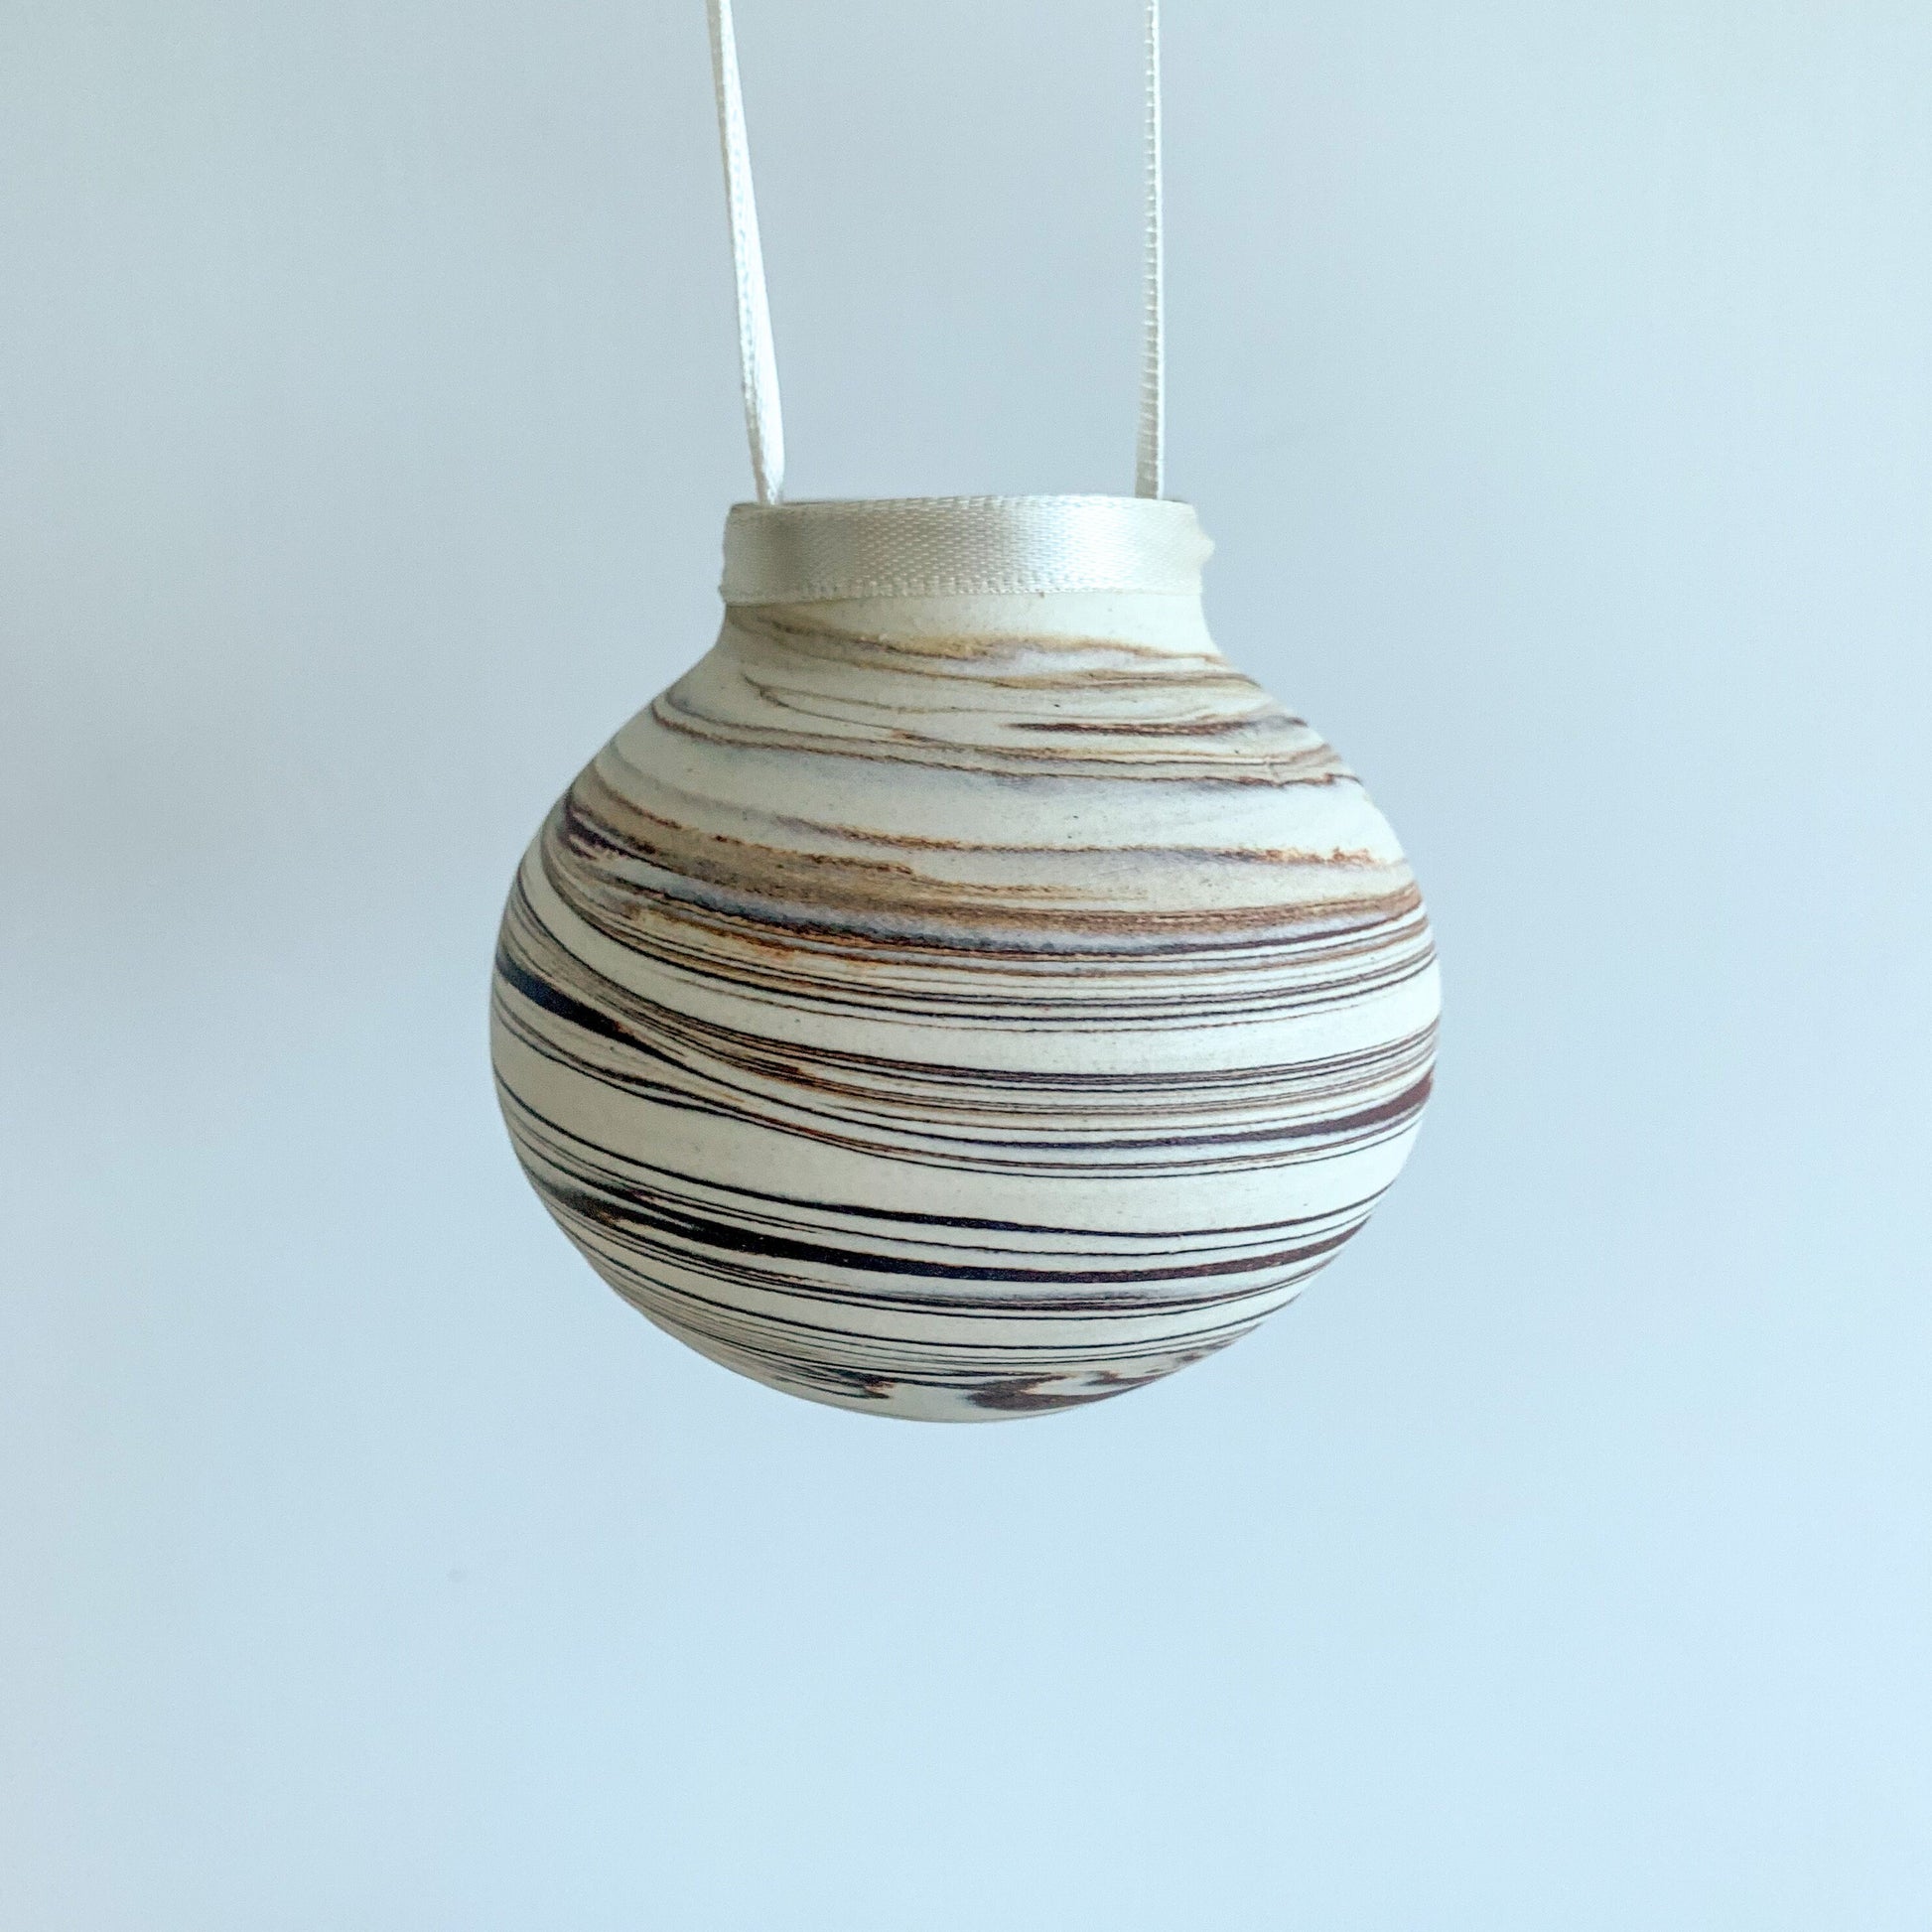 Pottery Ornament / Hanging Planter with white and brown marbling pattern